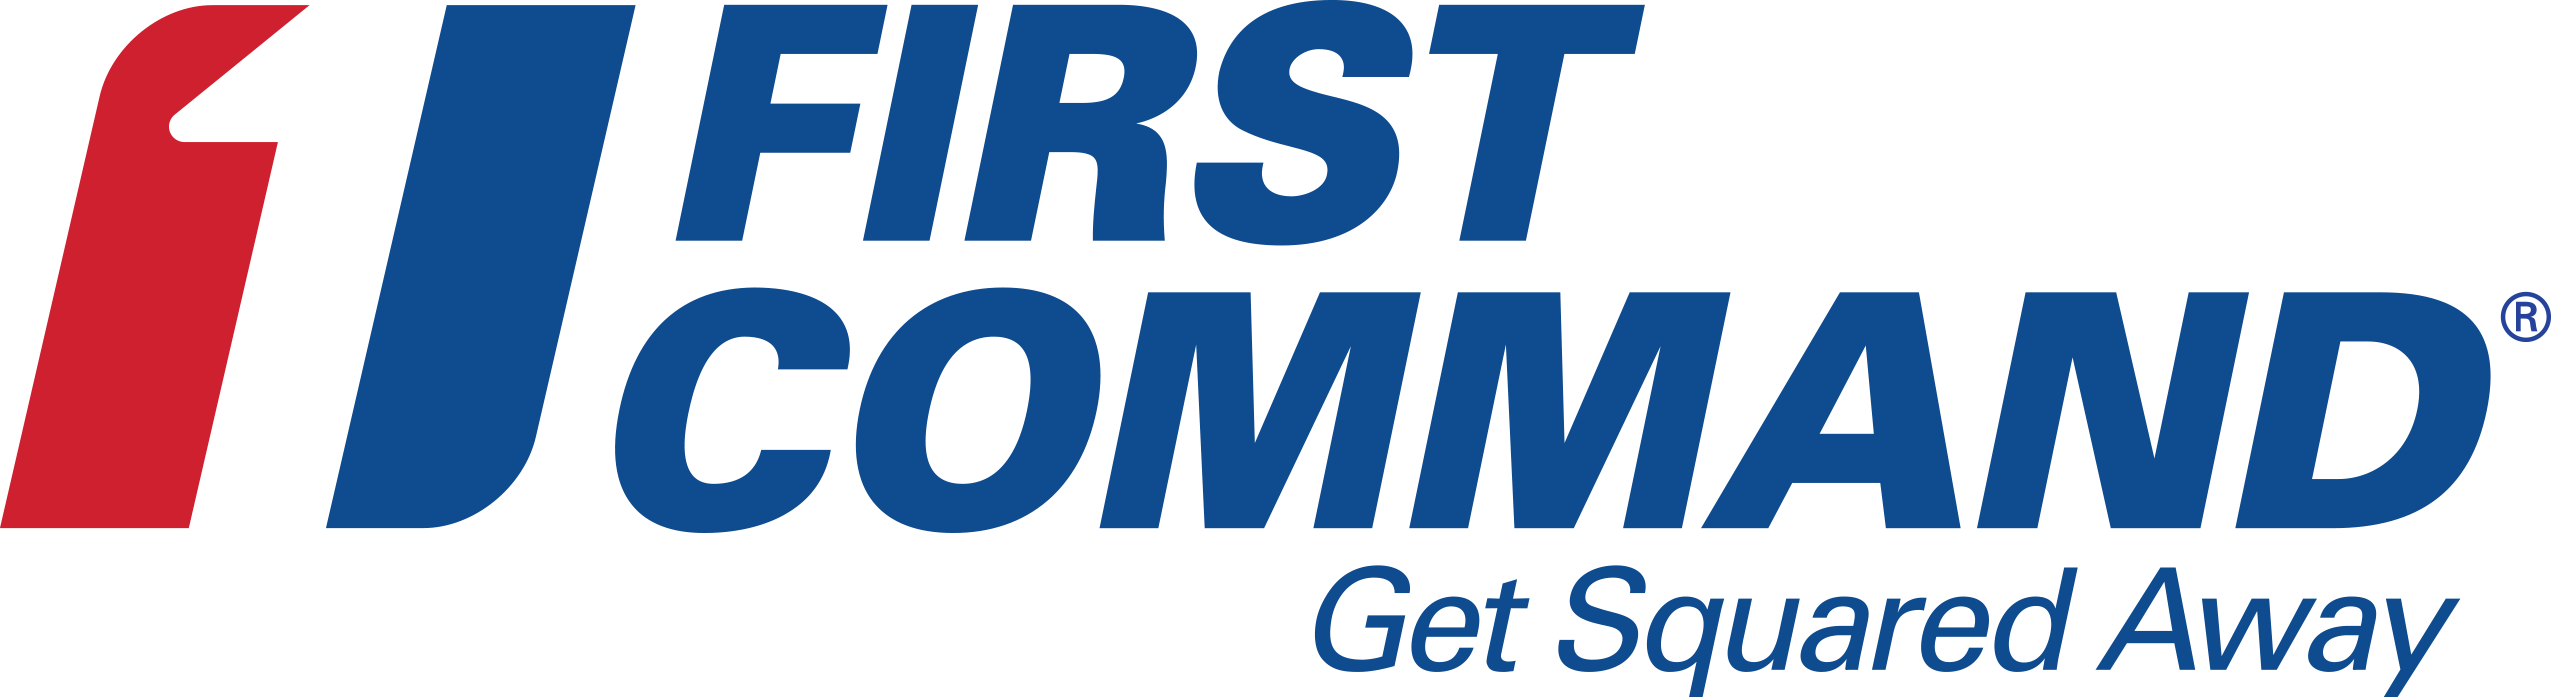 First_Command_logo_RGB_outline.png